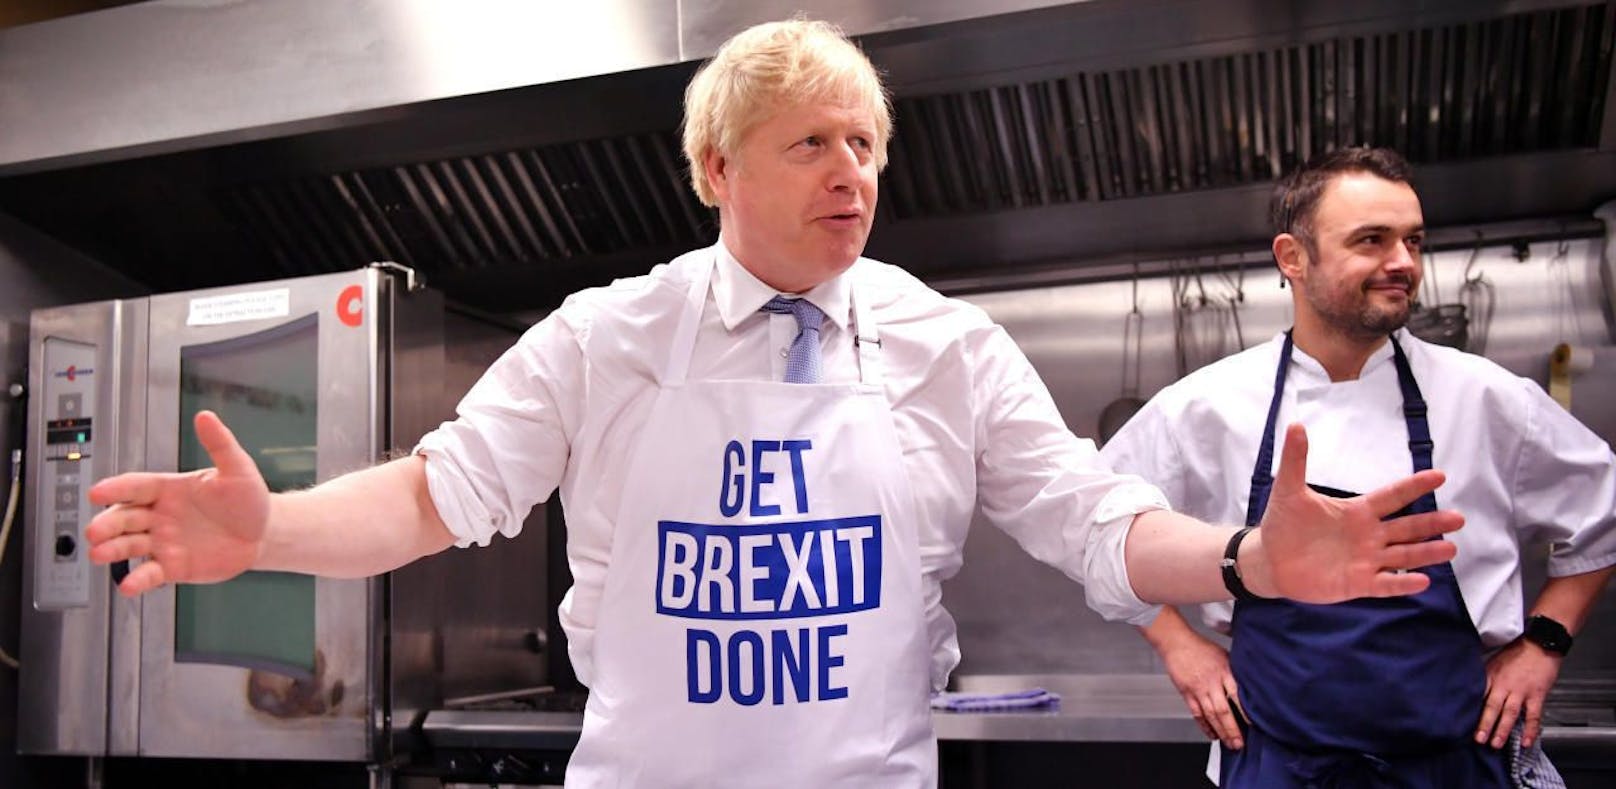 Britain's Prime Minister Boris Johnson prepares a pie at the Red Olive kitchen in Derby, Britain on December 11, 2019 on the final day of campaigning before a general election. Ben Stansall/Pool via REUTERS - RC2YSD97C2EF